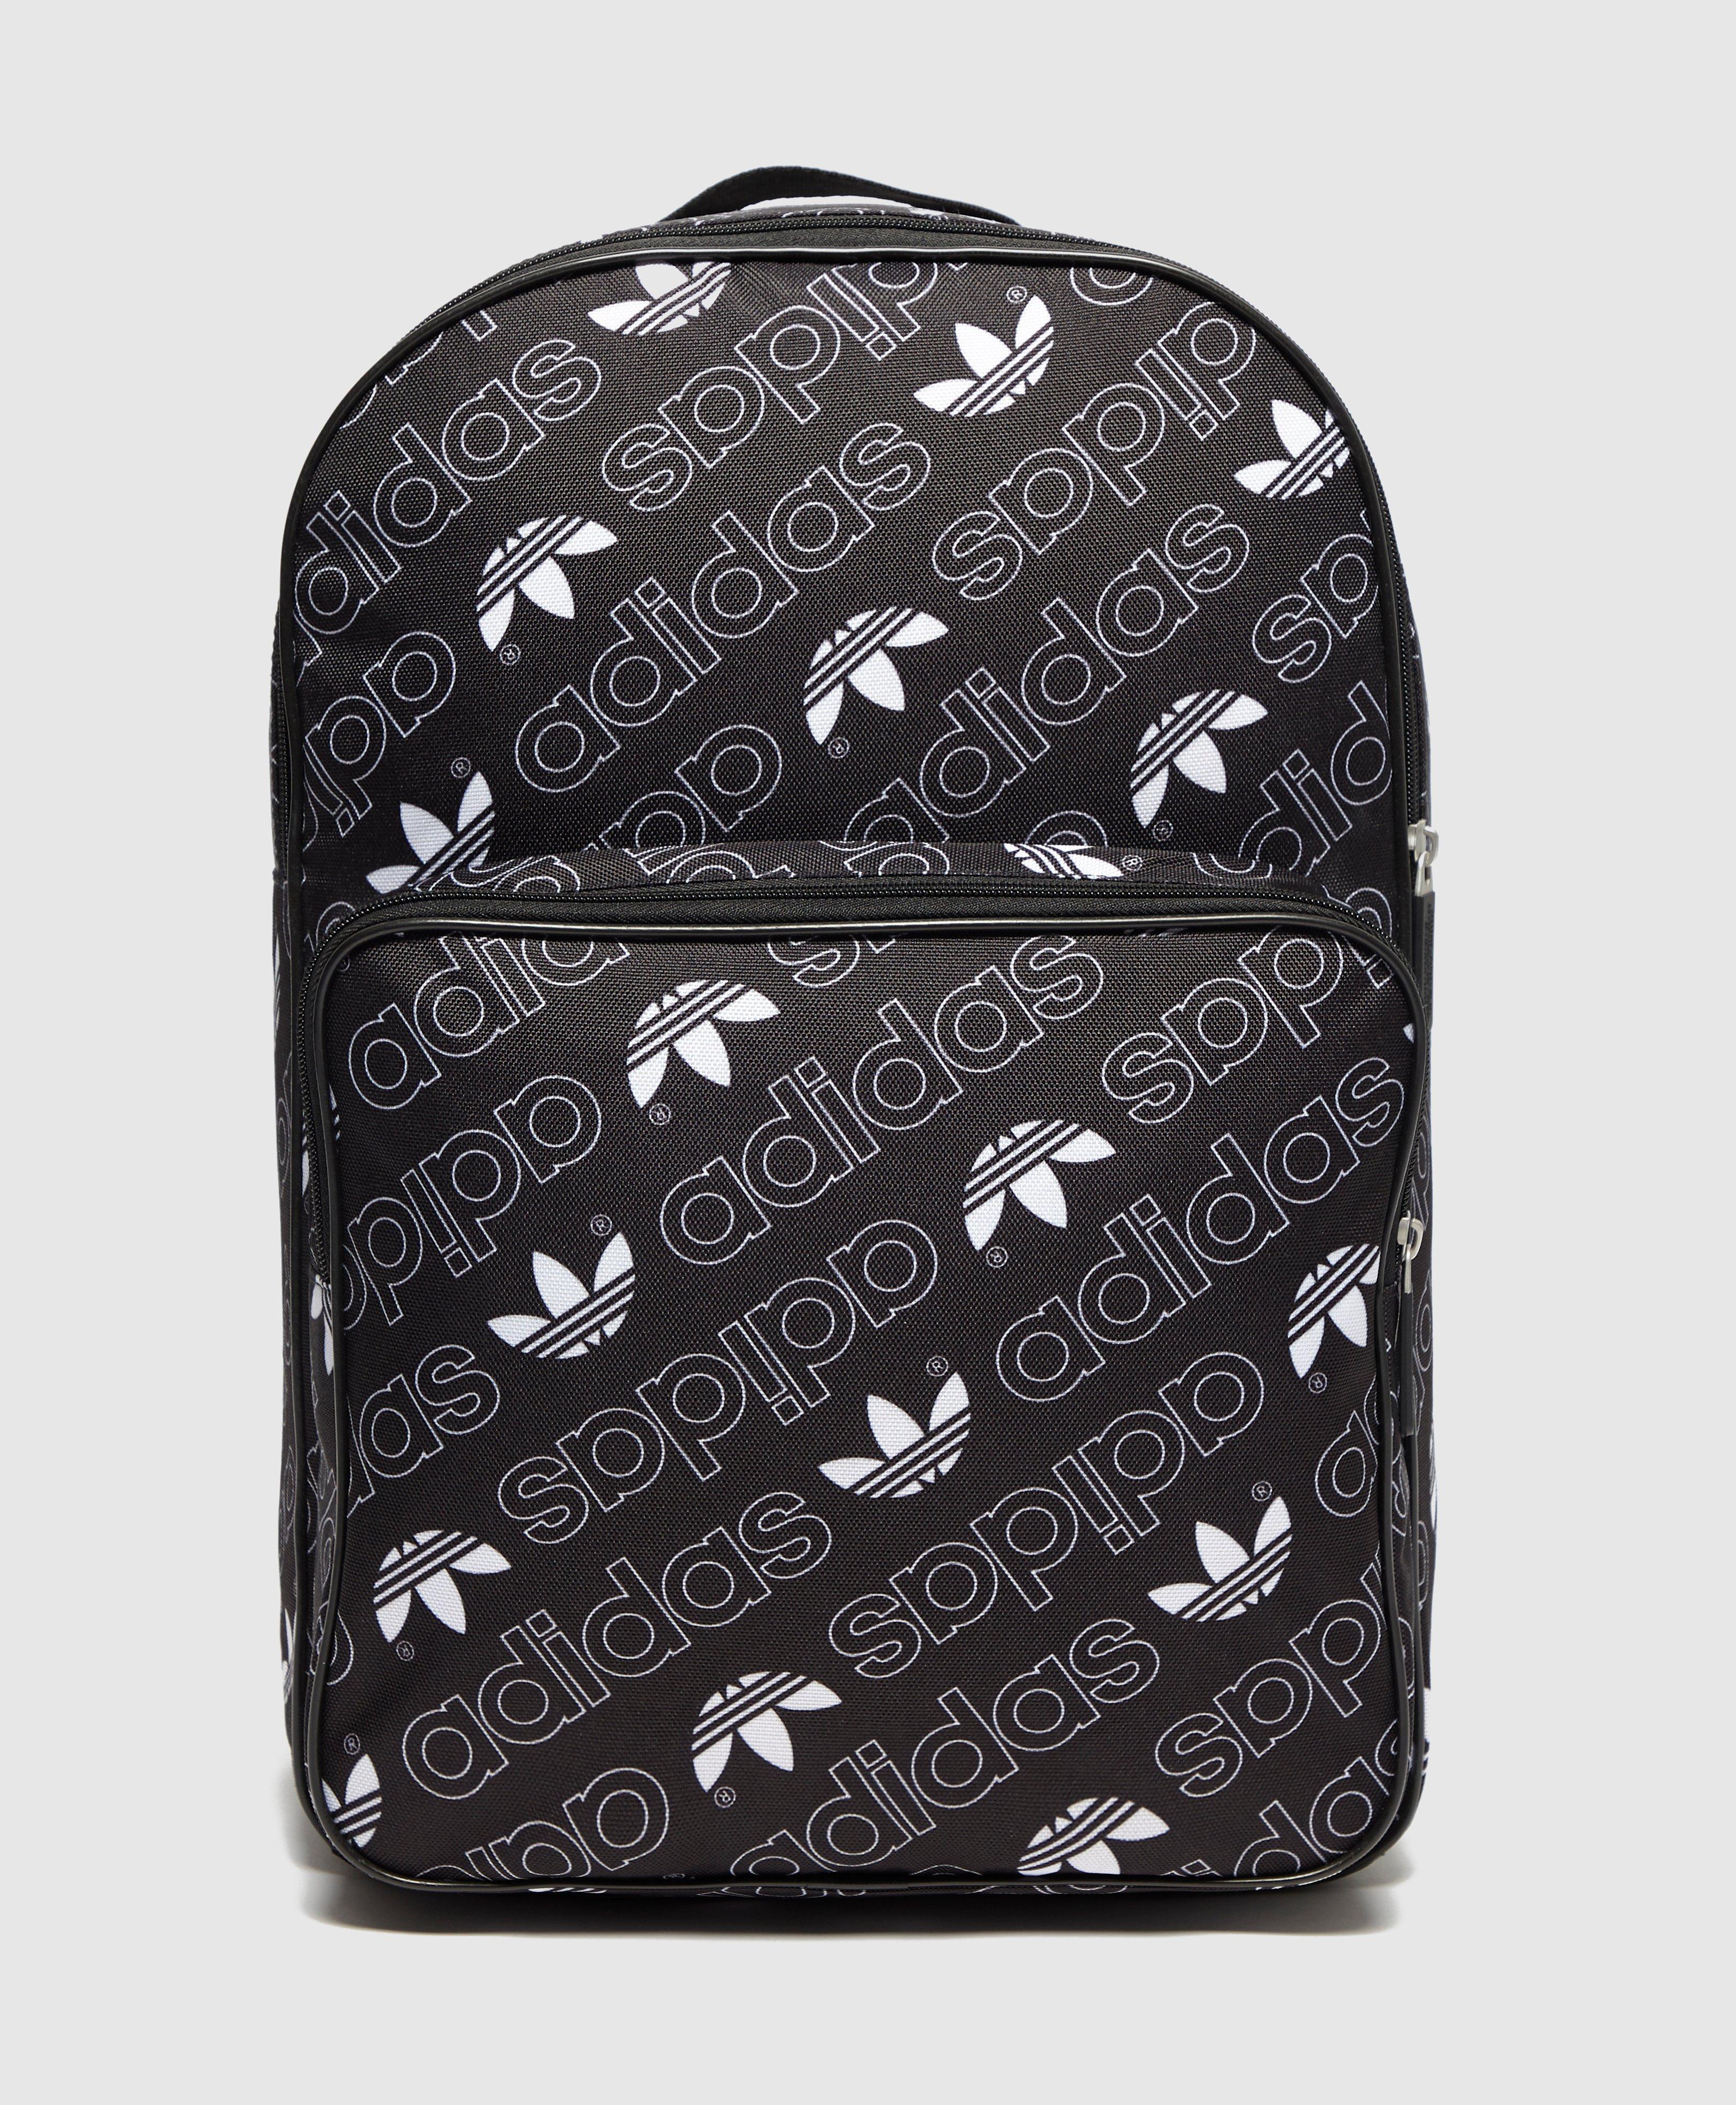 all adidas bags